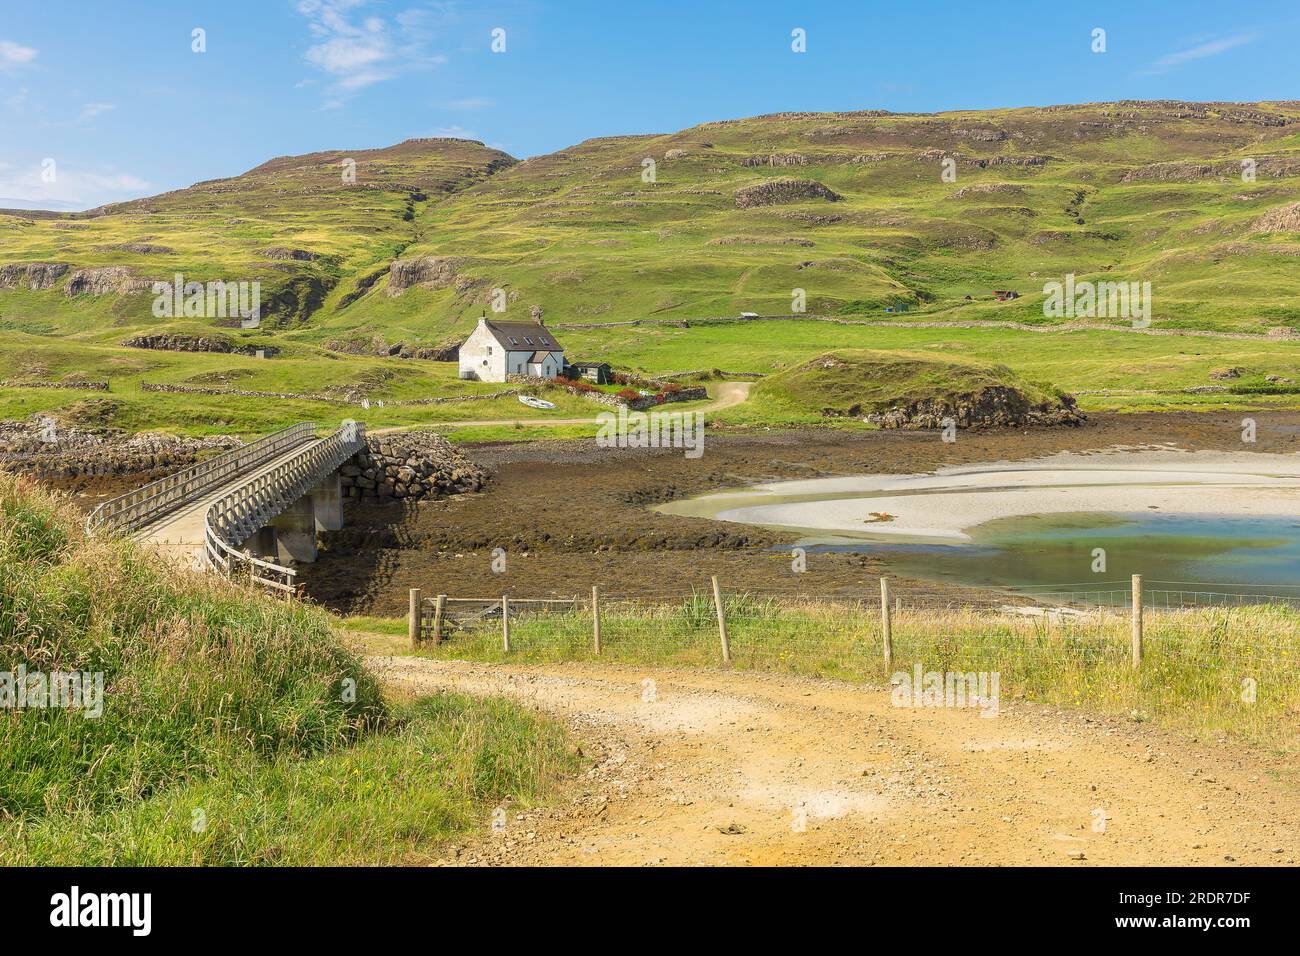 Sanday Bridge which link Canna to Sanday on the Isle of Canna, Small Isles, Scotland with typical croft house, beach and single track, unmade road acr Stock Photo